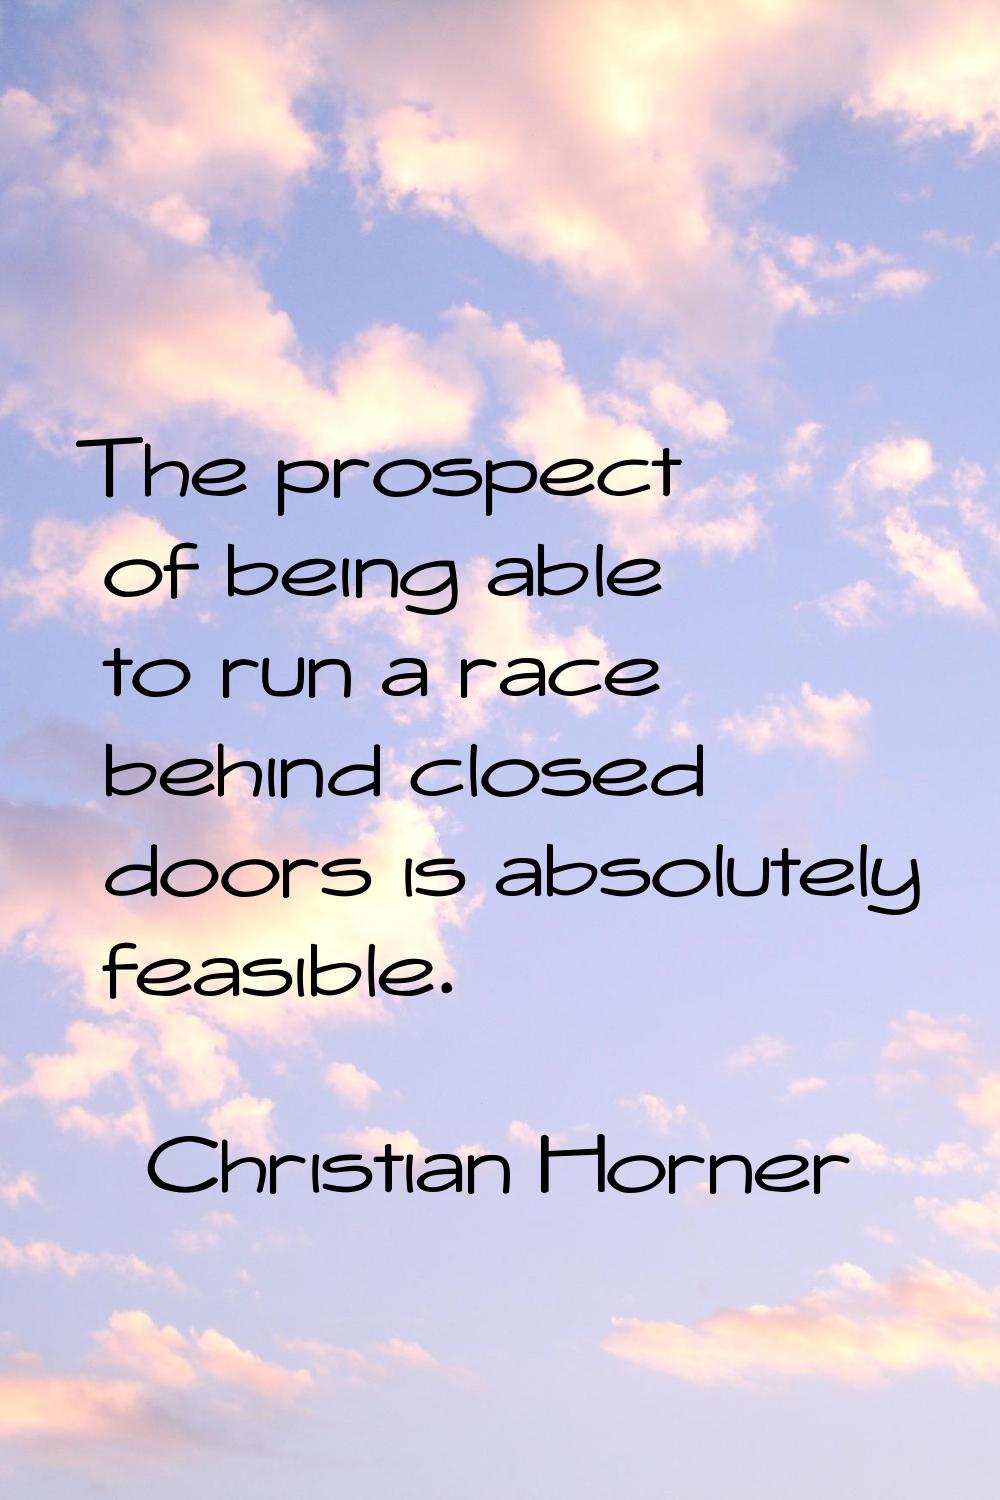 The prospect of being able to run a race behind closed doors is absolutely feasible.